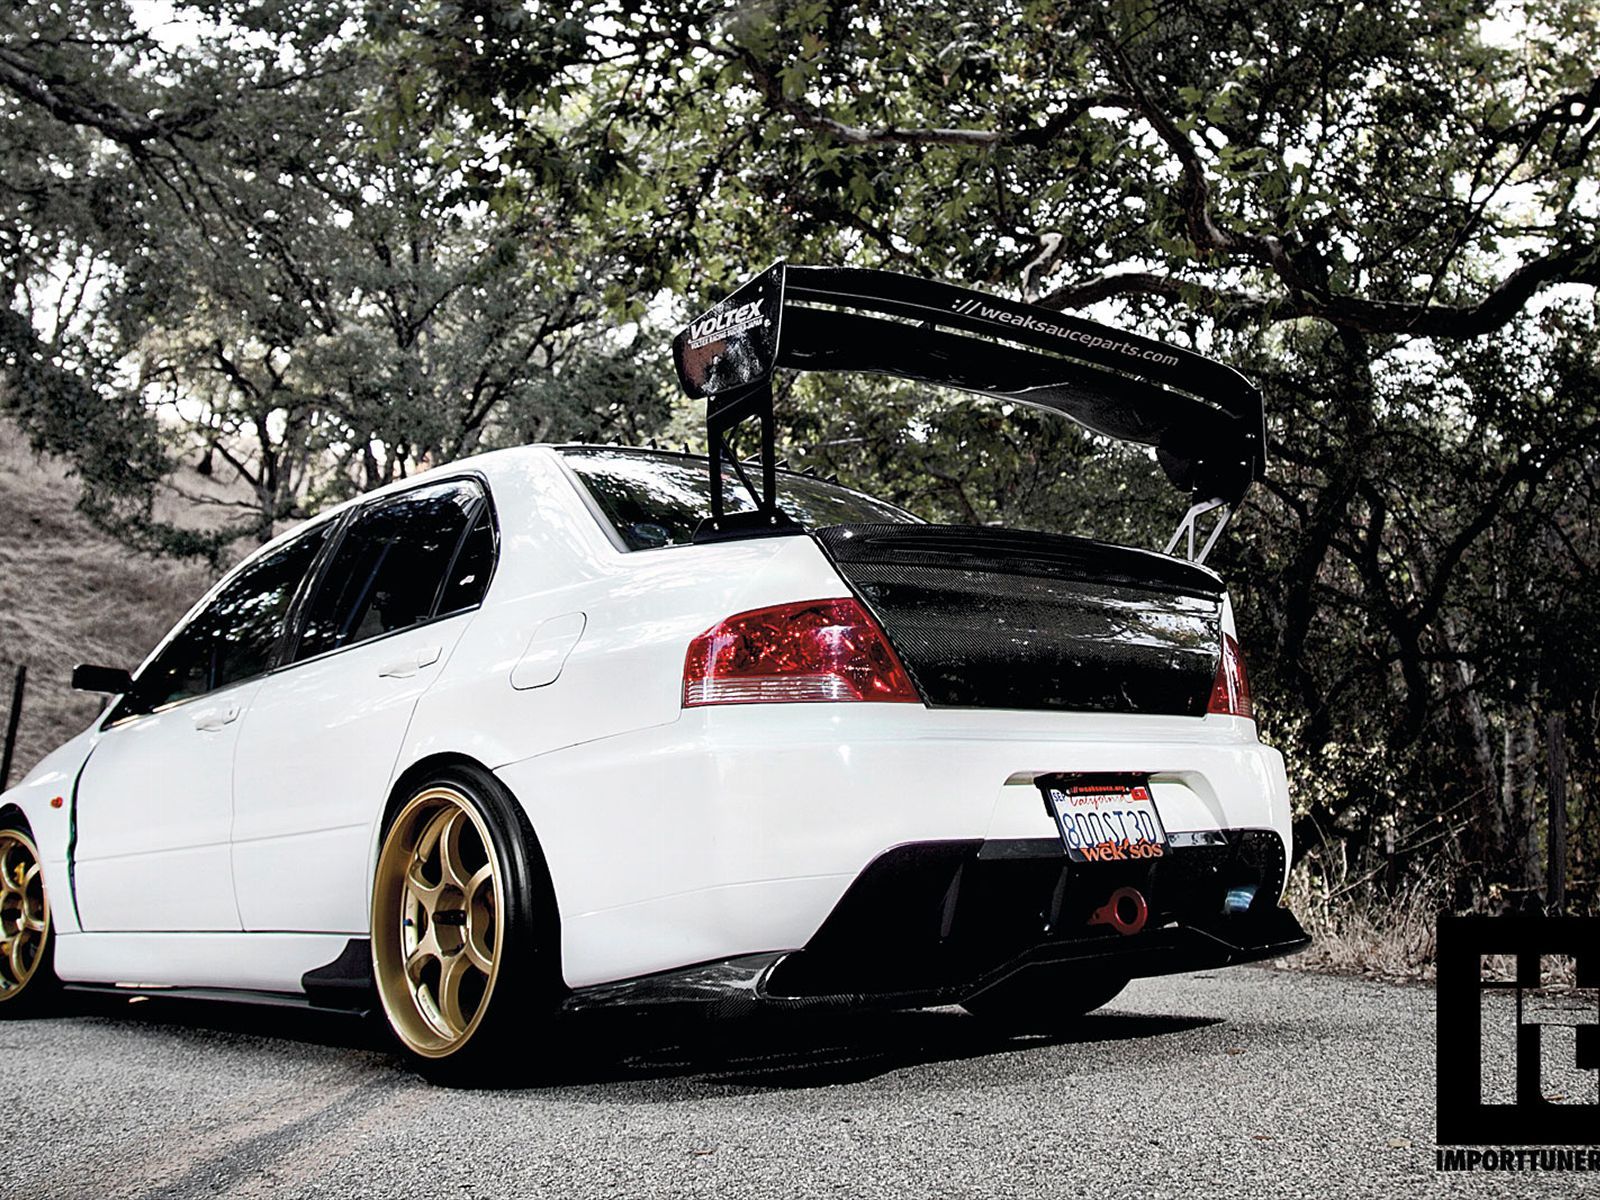 Free download Mitsubishi Evo 9 Wallpaper Image Picture Becuo [1600x1200] for your Desktop, Mobile & Tablet. Explore EVO 9 Wallpaper. Mitsubishi Evo 9 Wallpaper, Mitsubishi Lancer Evo Wallpaper, Evo 8 Wallpaper